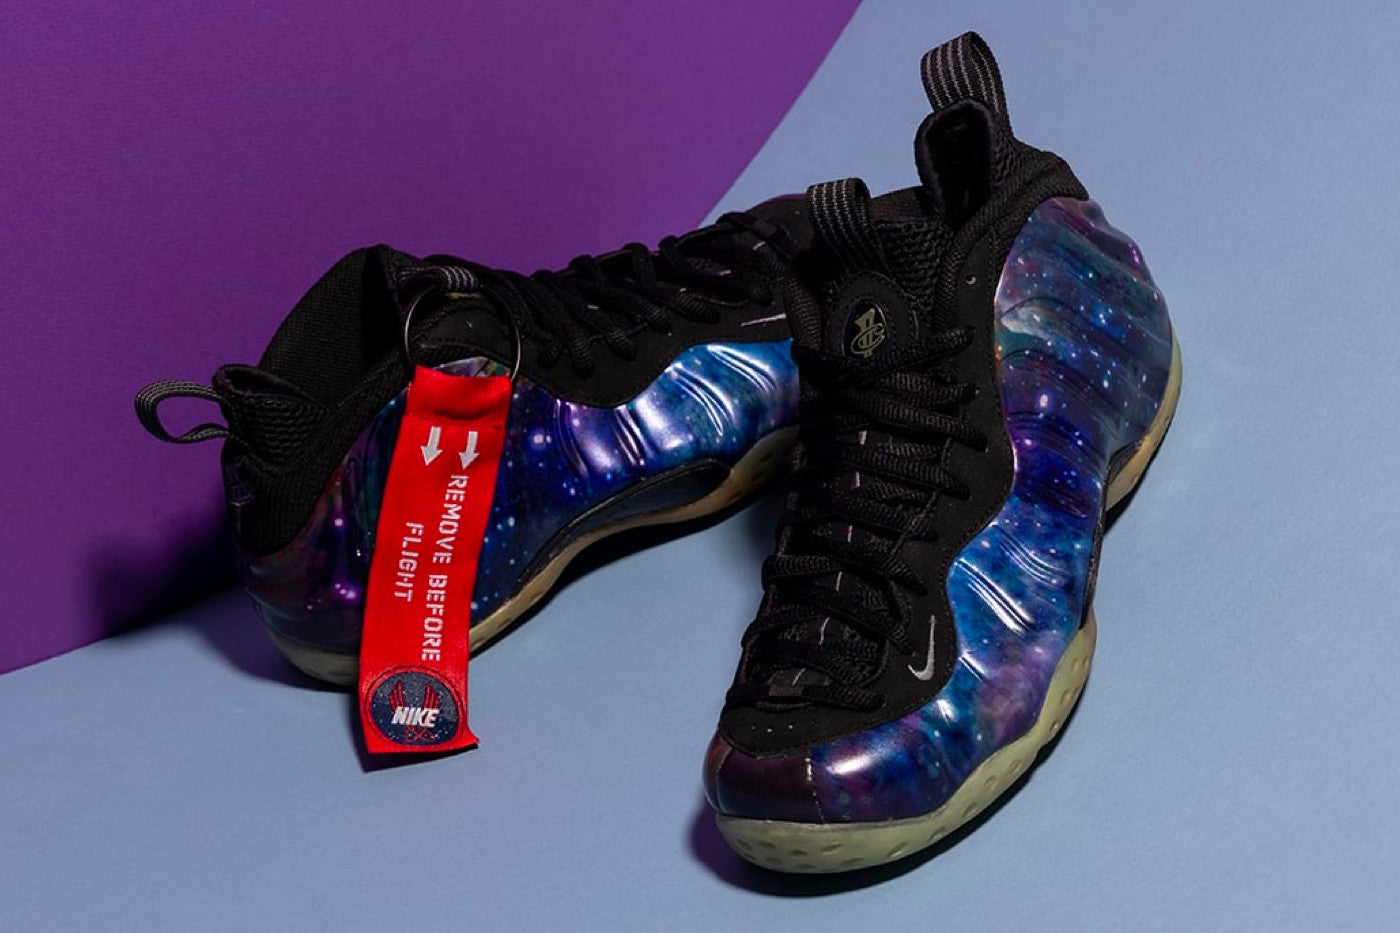 The Nike Air Foamposite One 